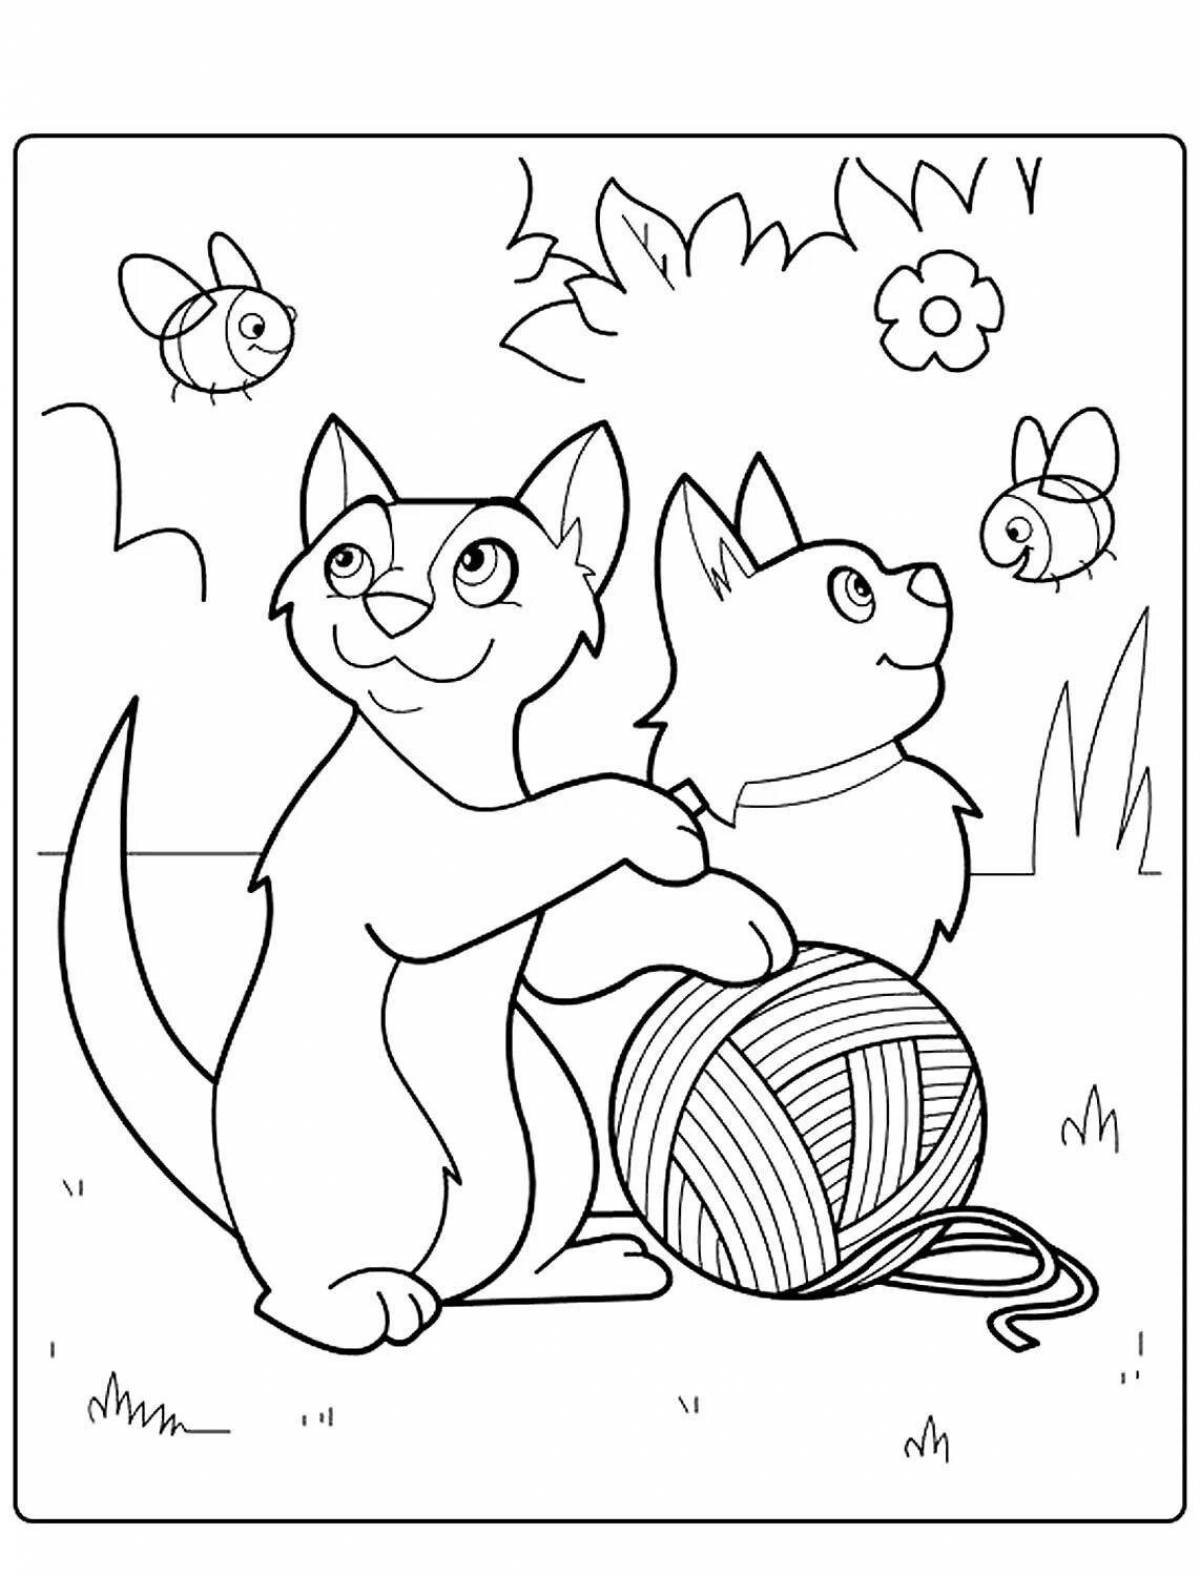 Coloring page mischievous cat with a ball